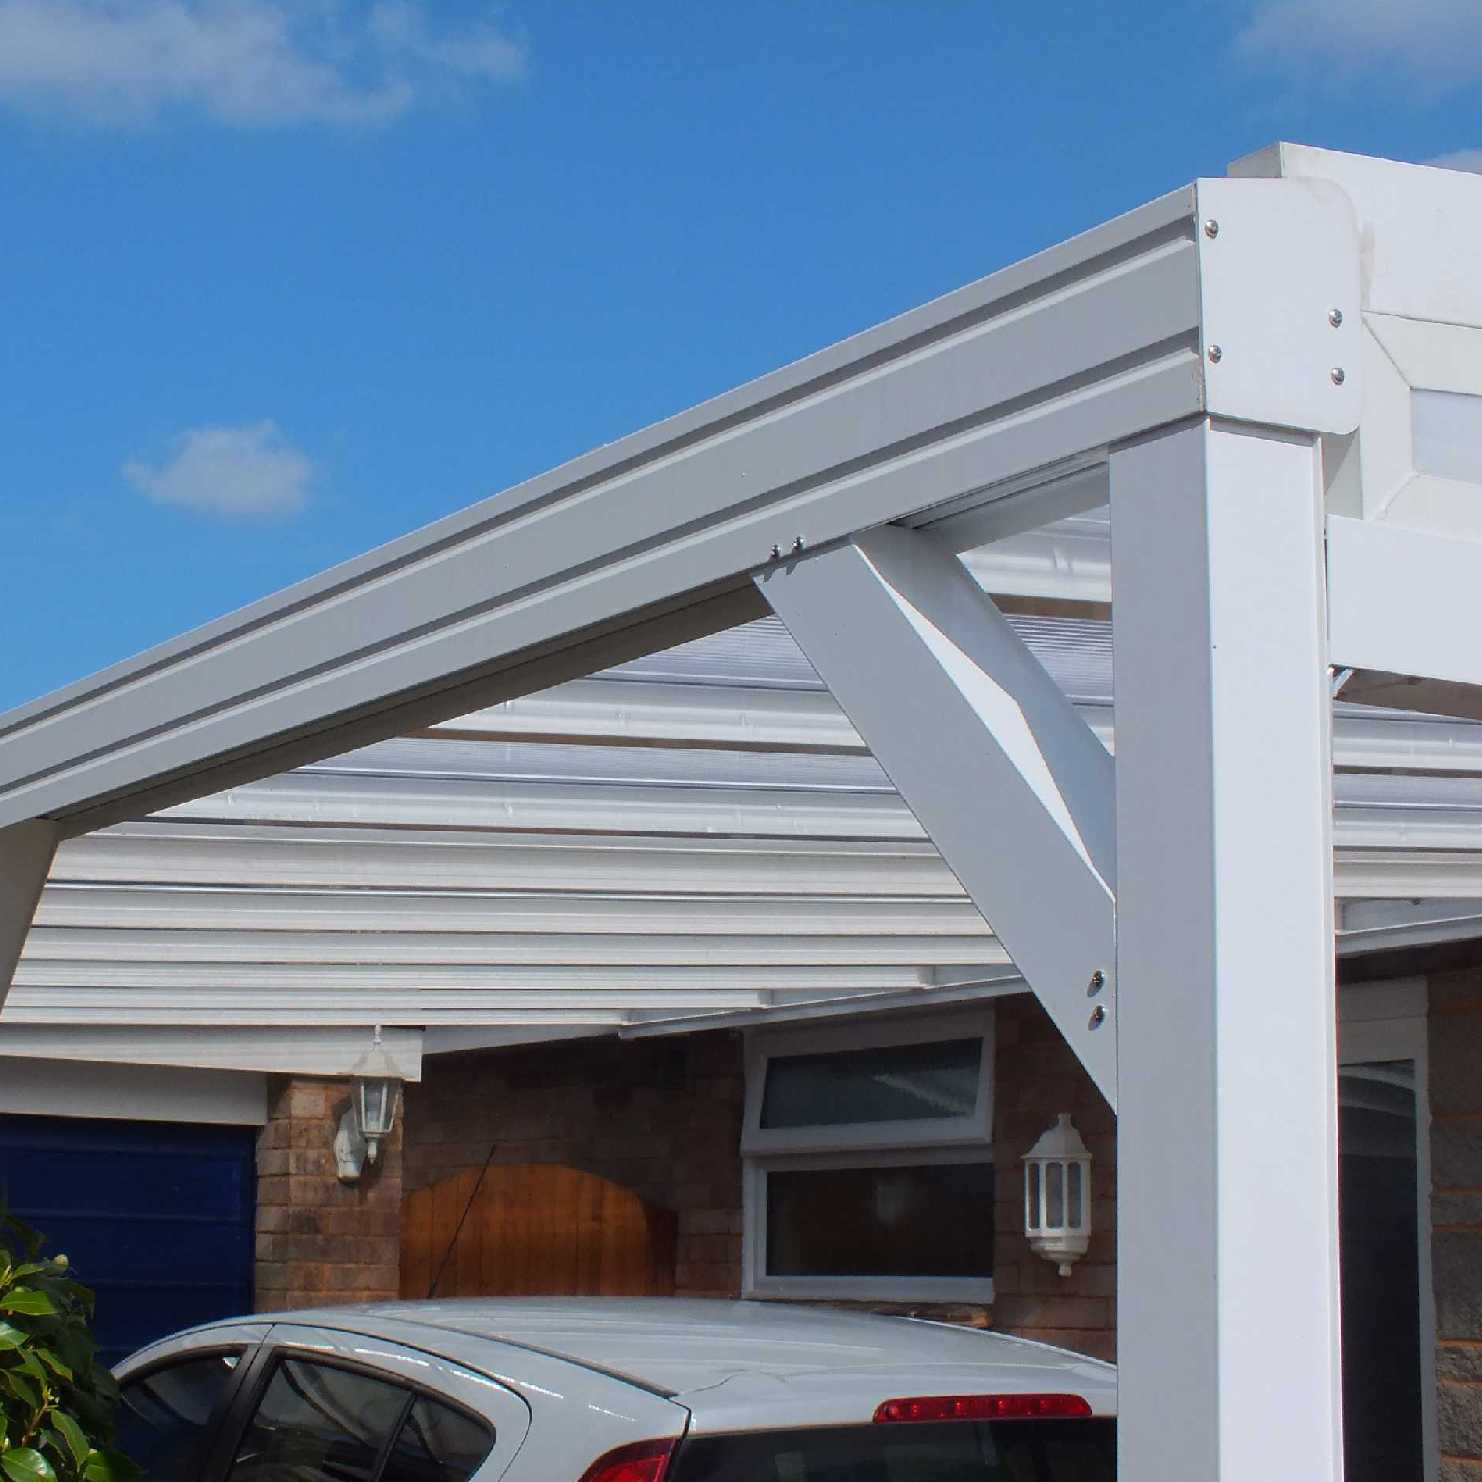 Great deals on Omega Smart Lean-To Canopy, White with 16mm Polycarbonate Glazing - 8.4m (W) x 2.0m (P), (4) Supporting Posts